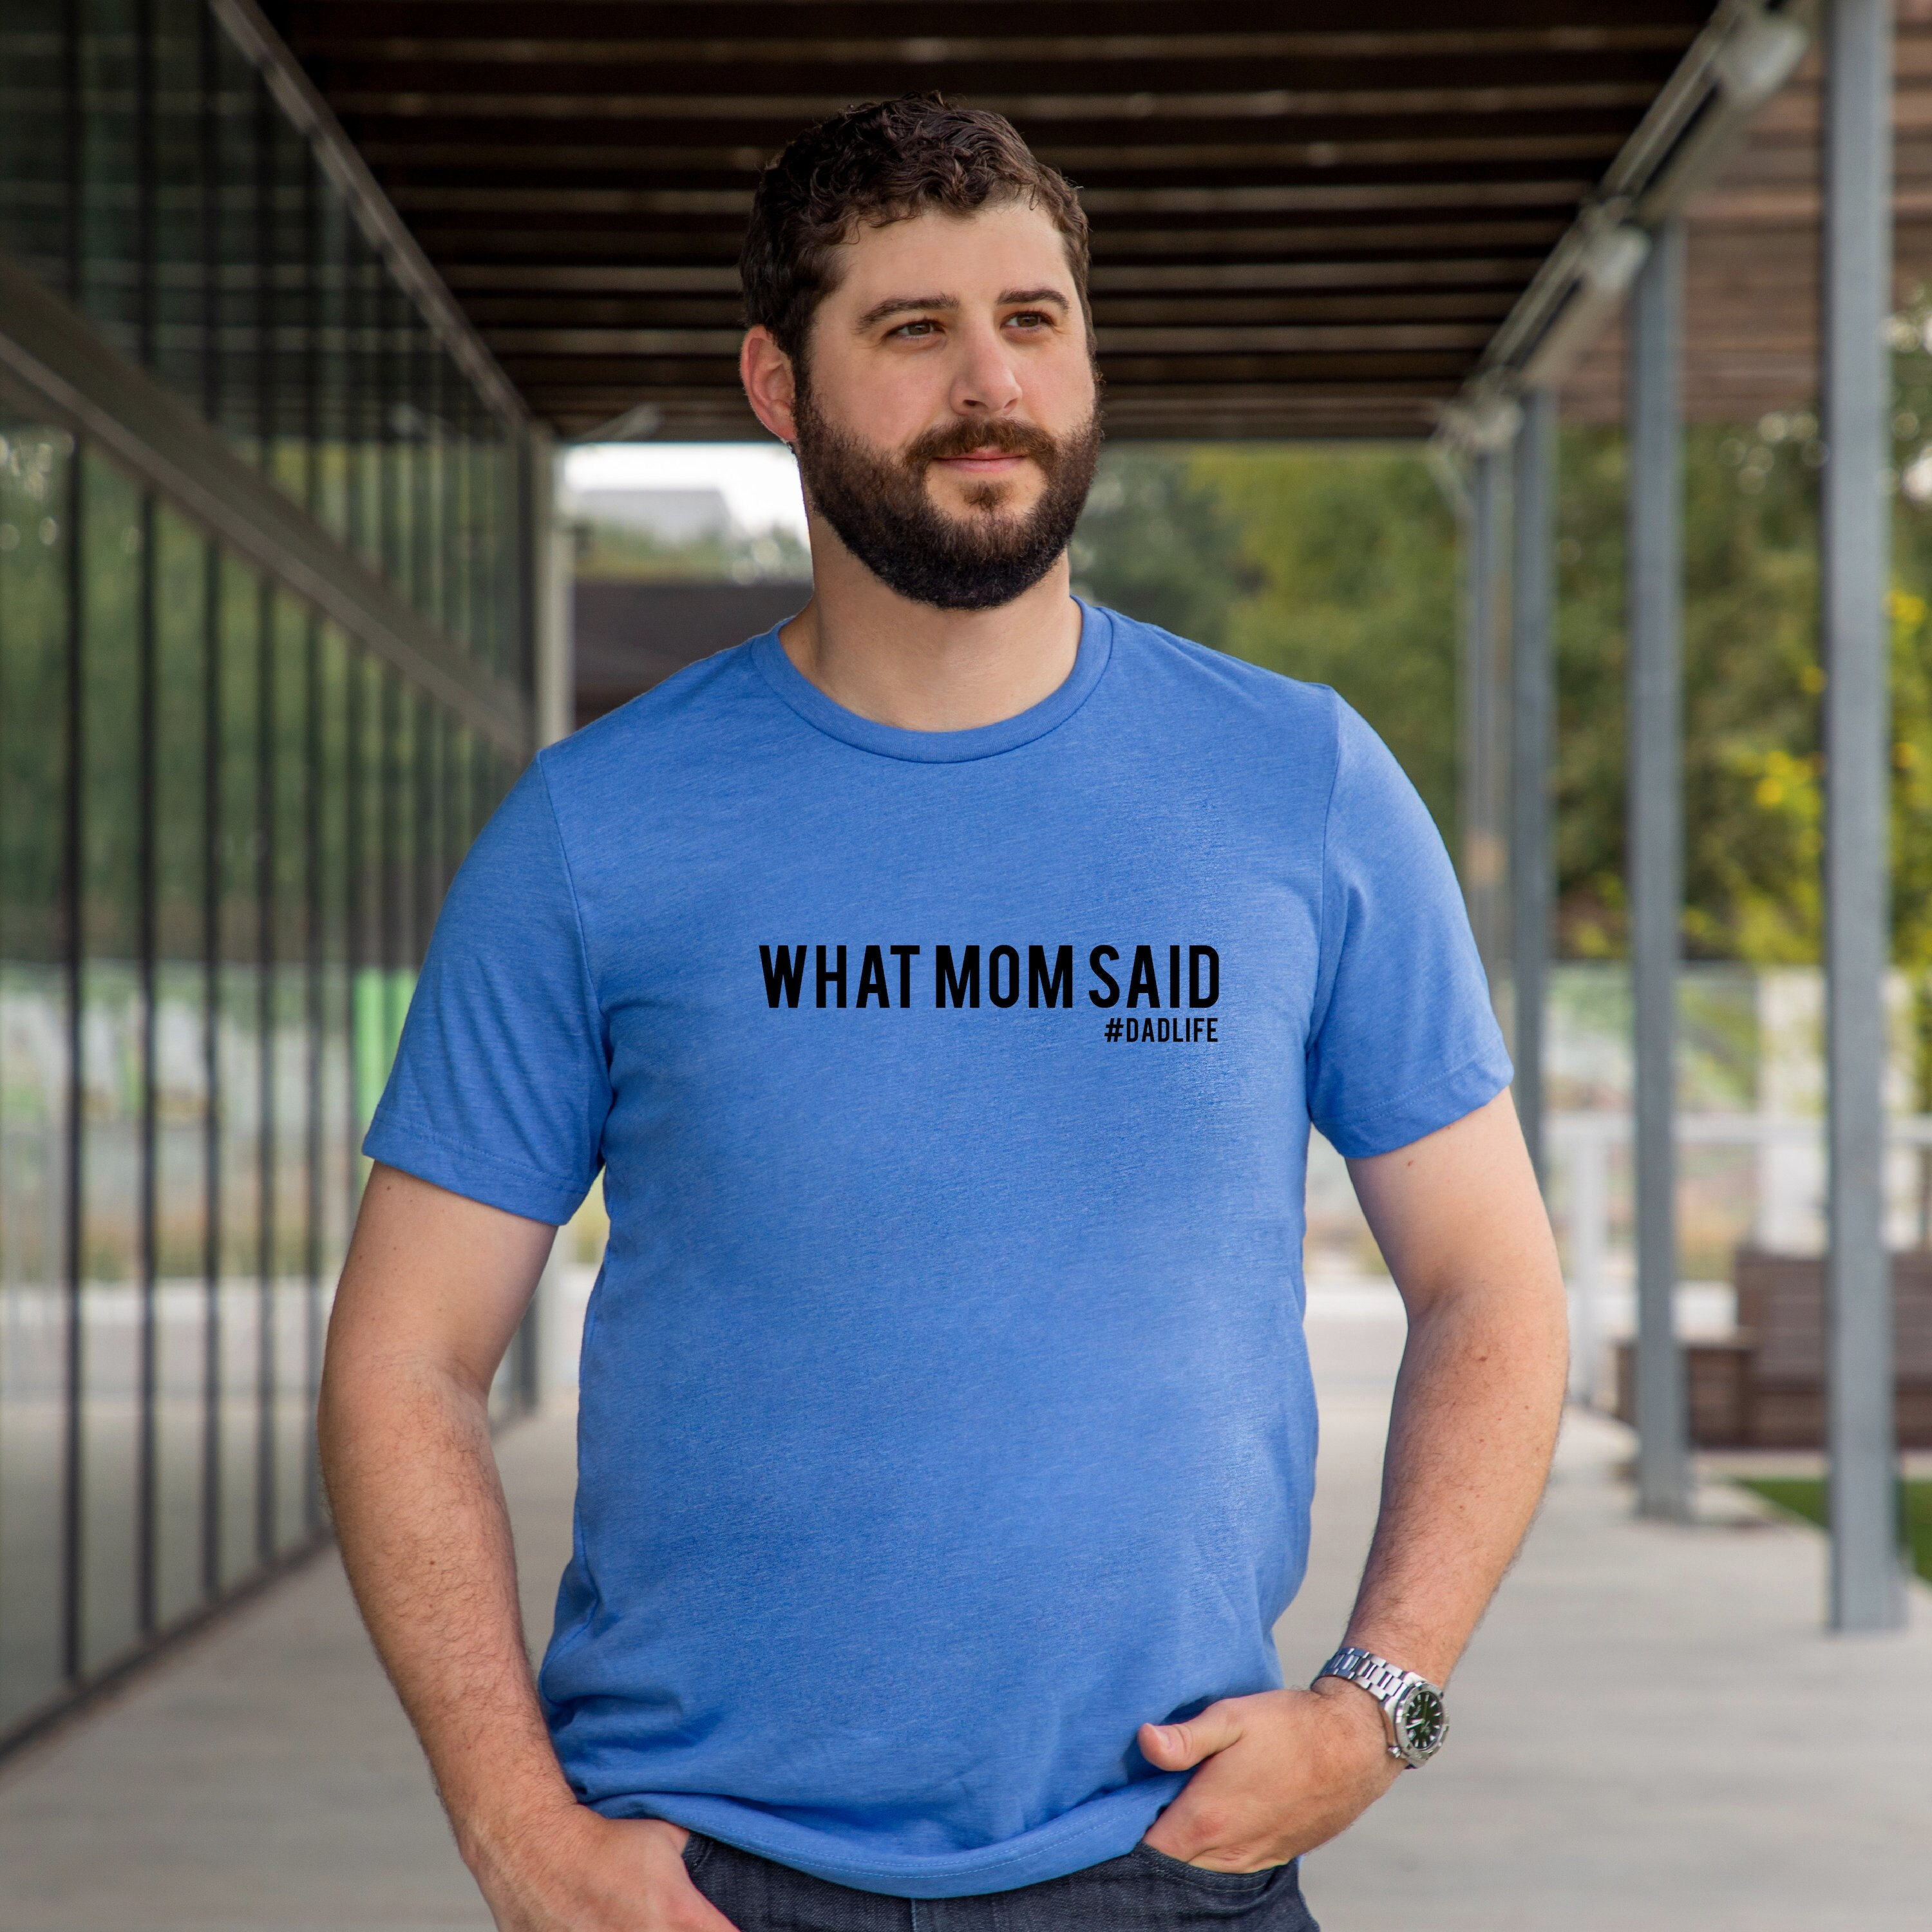 What Mom Said Tshirt, Funny dad shirt, Fathers Day Gift, New Parents, Gift for Dad, funny Dad Tshirt, Trendy